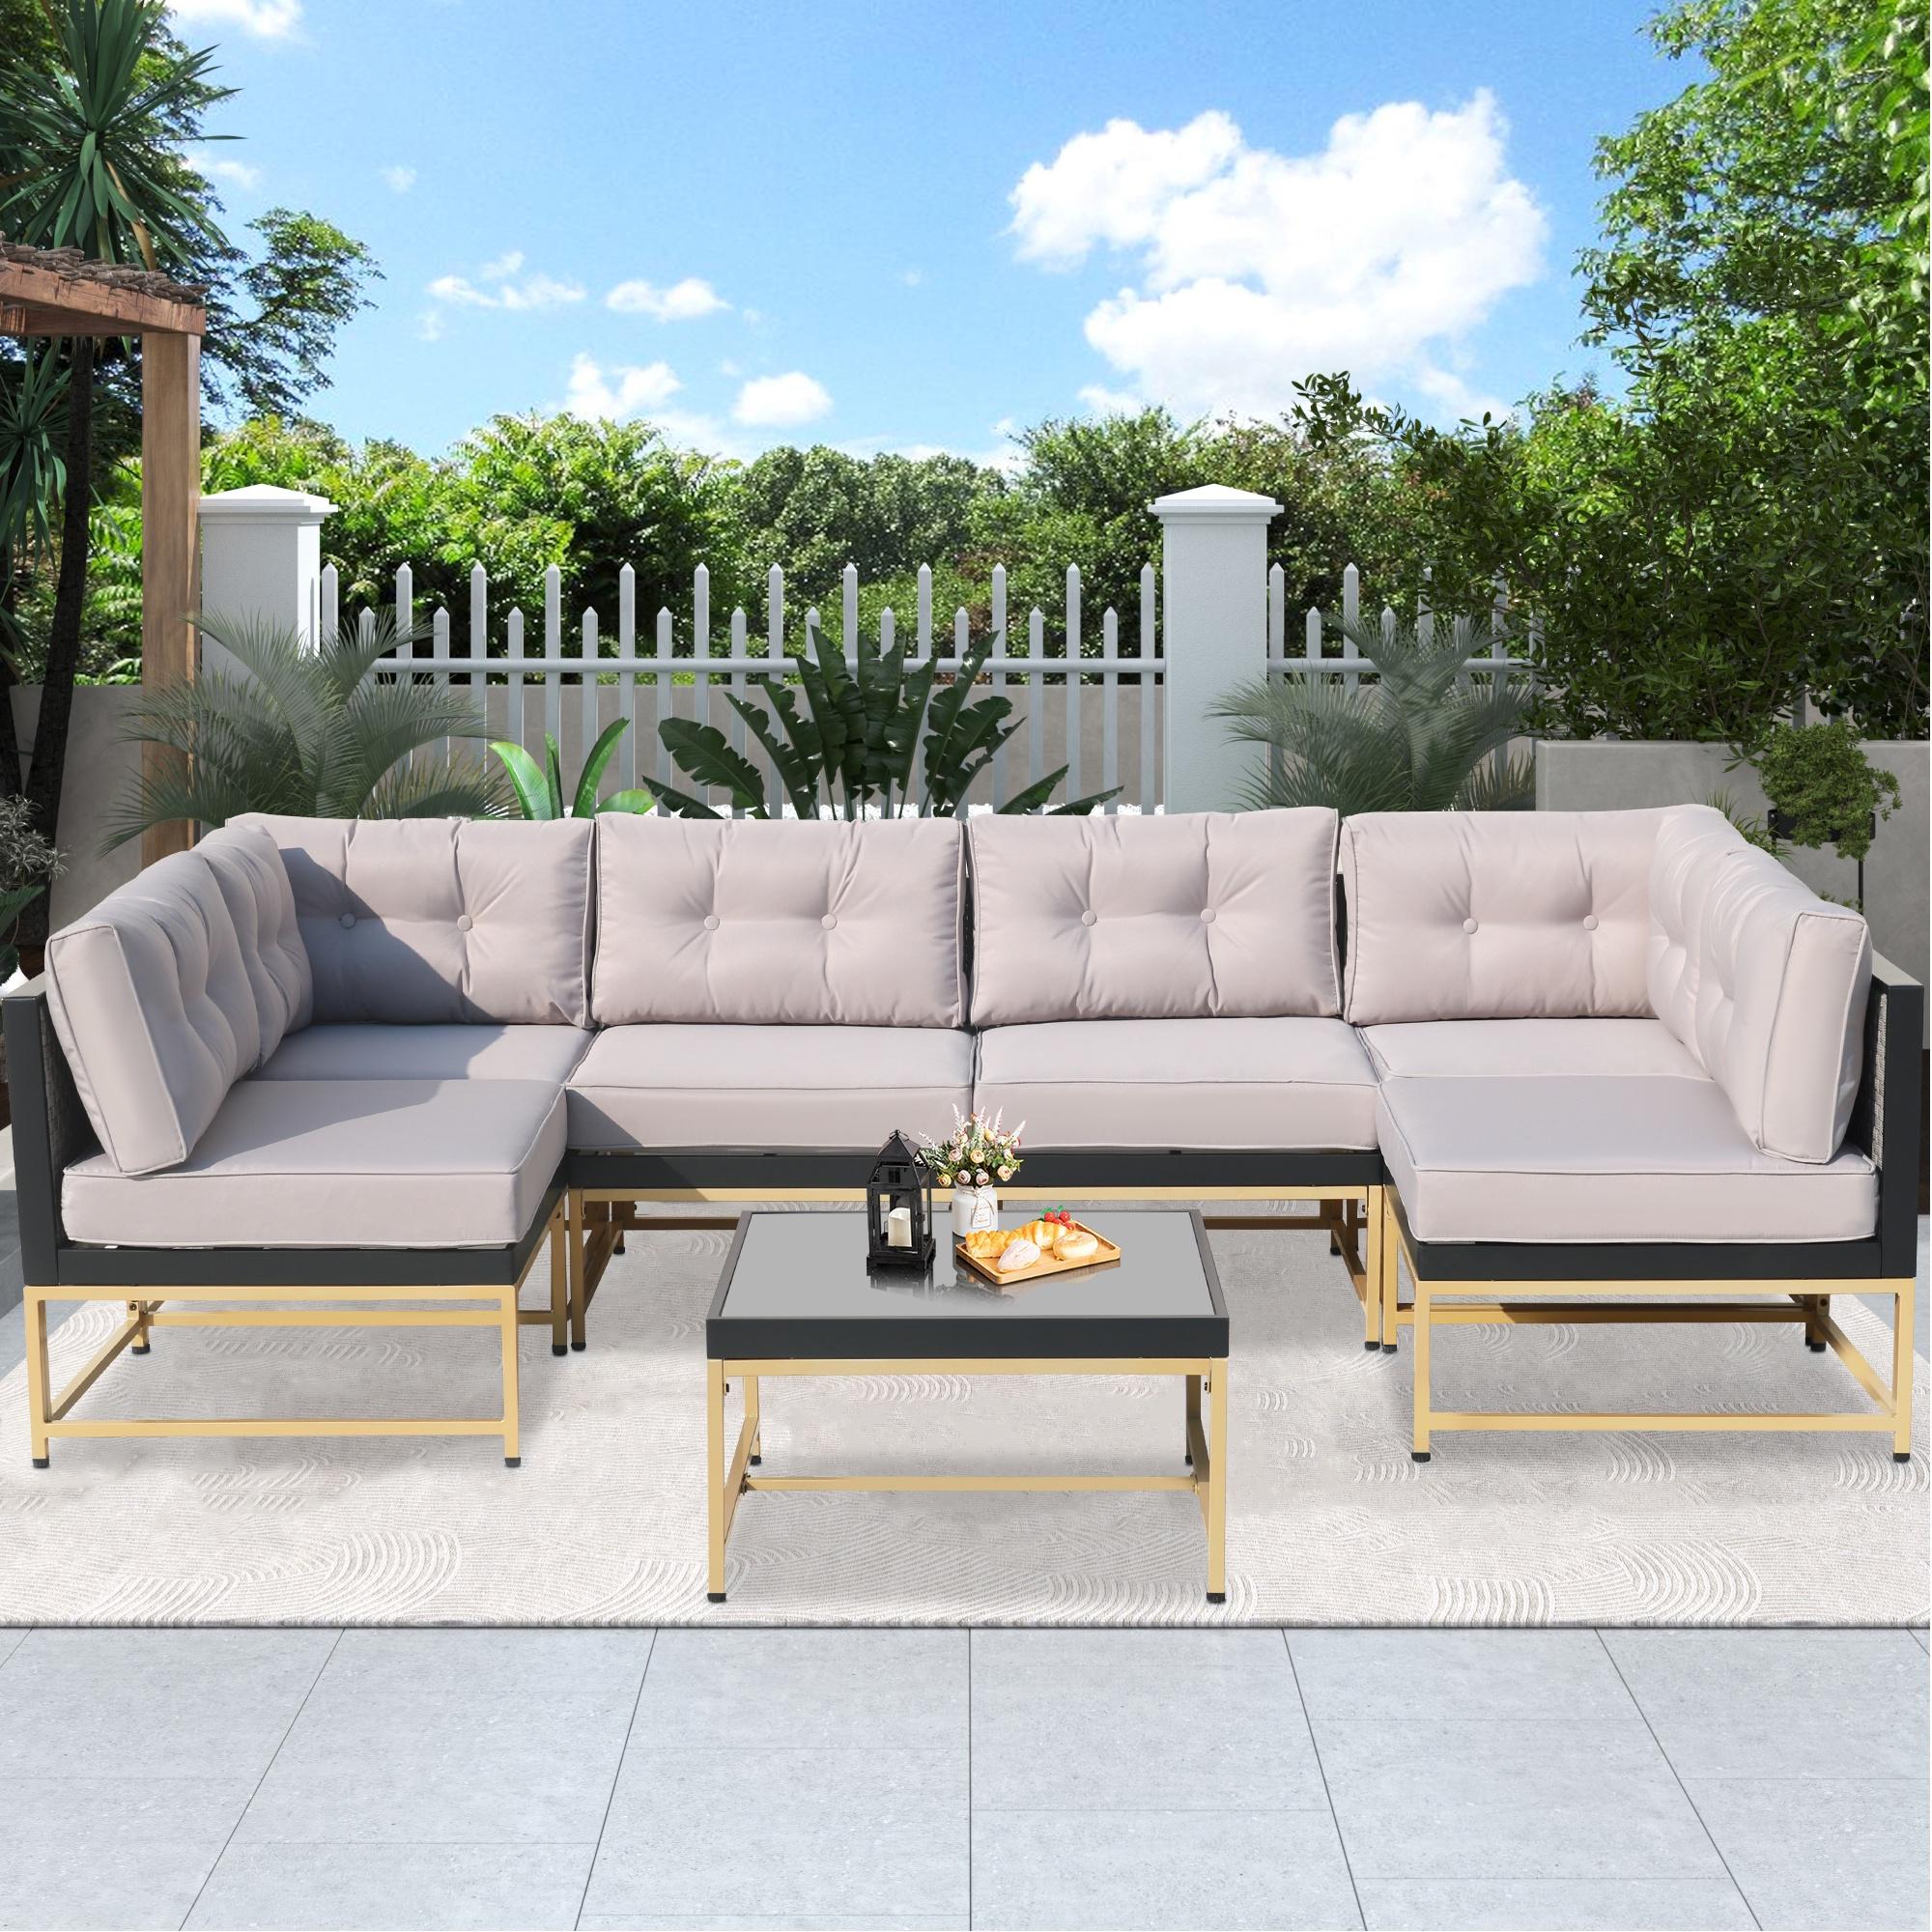 Patio Outdoor Furniture Sets, 7 Pieces All-Weather Rattan Sectional Sofa with Tea Table and Cushions, PE Rattan Wicker Sofa Couch Conversation Set for Garden Backyard Poolside - image 3 of 11